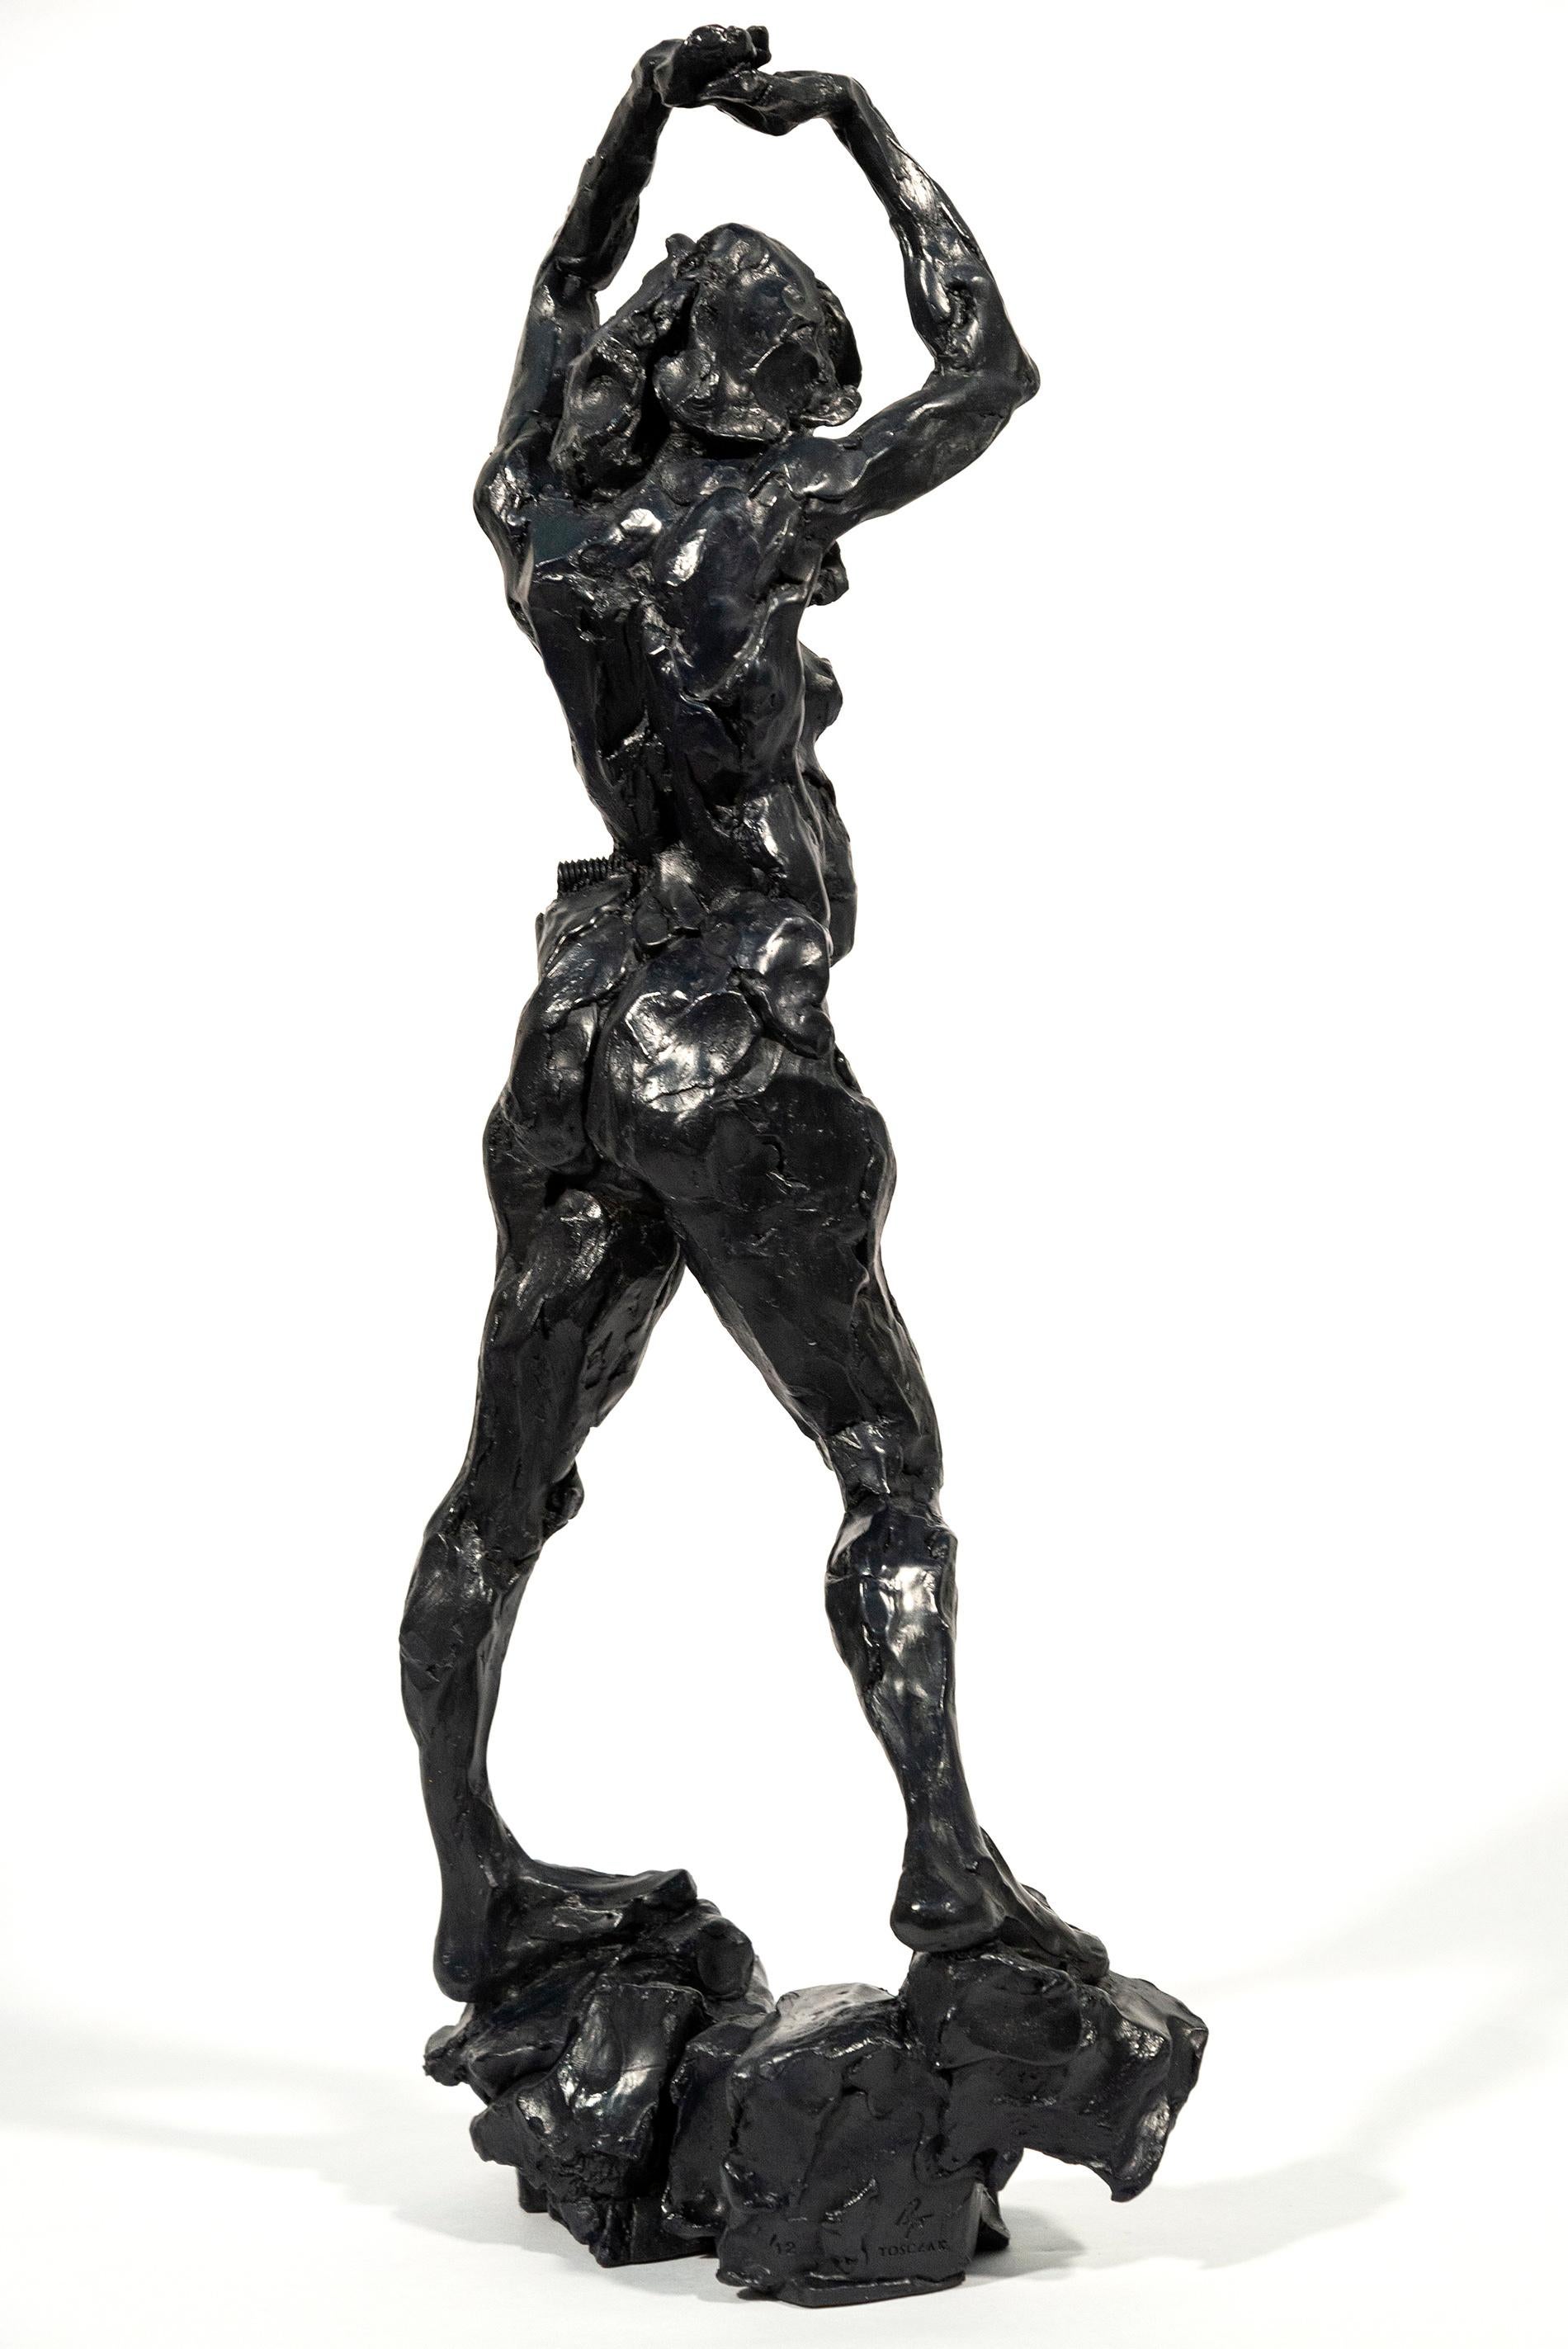 Canadian artist Richard Tosczak captures the beauty and elegance of the human form in his sculptures. This piece shows a nude female in a strong pose, arms raised above her head. Masterfully cast in bronze, in an edition of 12.
 
“The figurative